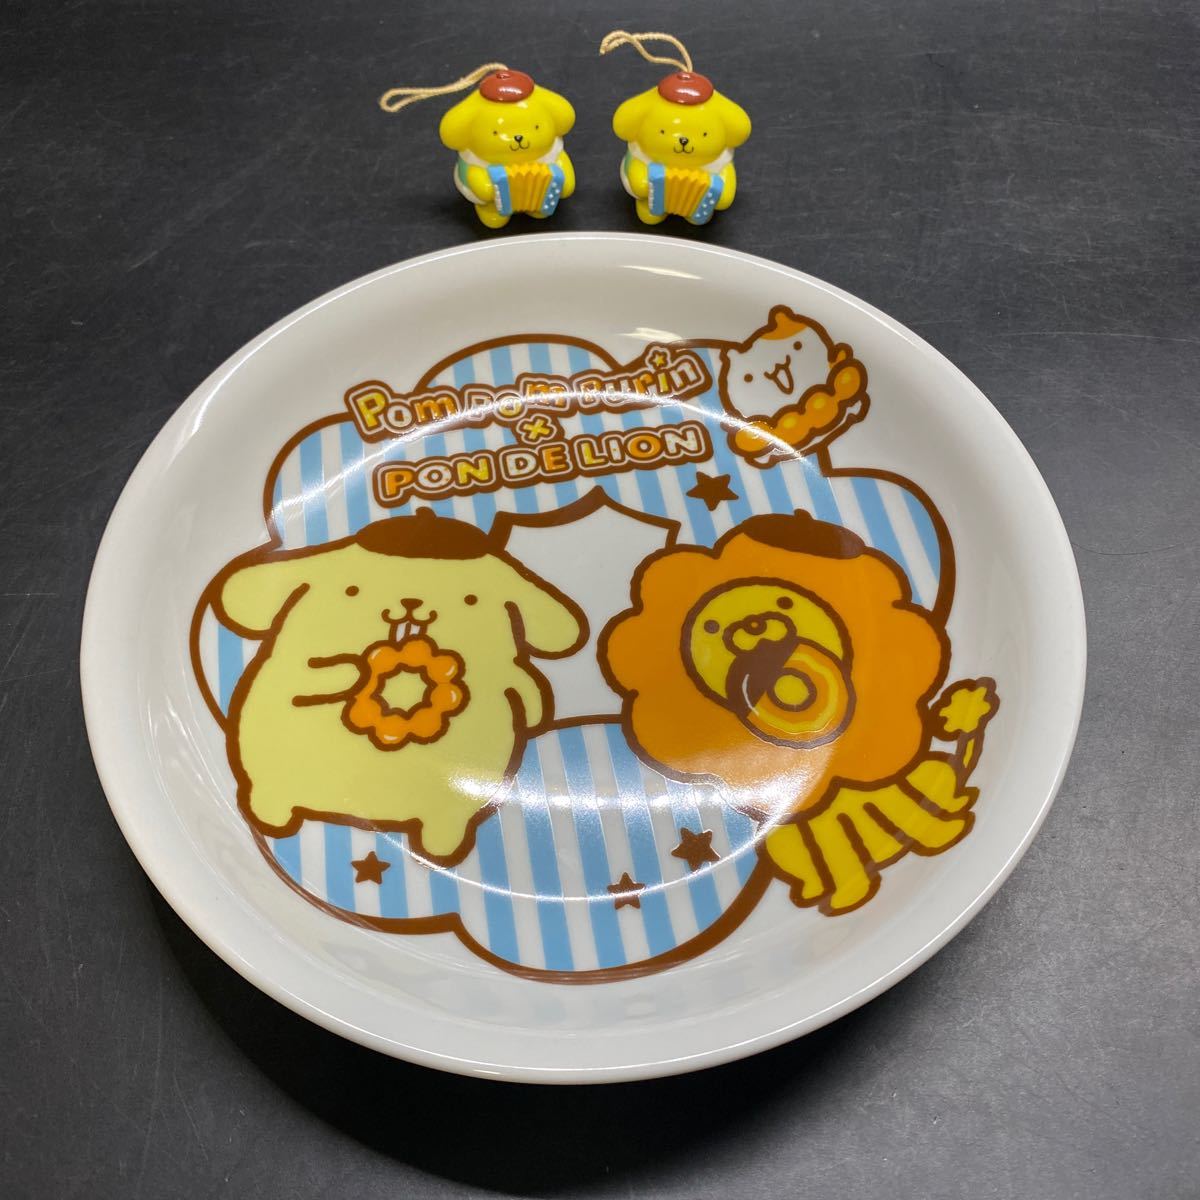  Pom Pom Purin ×ponte lion plate curry plate . plate collaboration Mister Donut mistake do tableware used rare not for sale mascot 2 point 